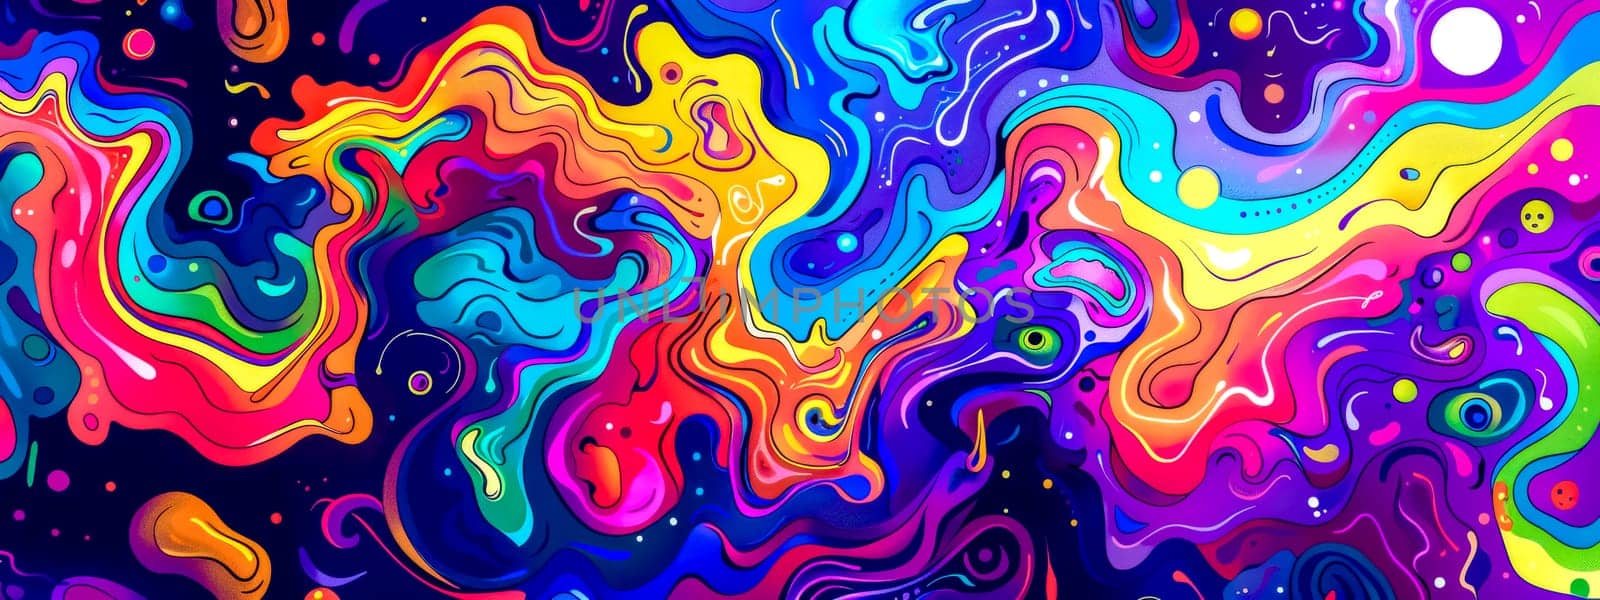 Vibrant psychedelic waves abstract background by Edophoto